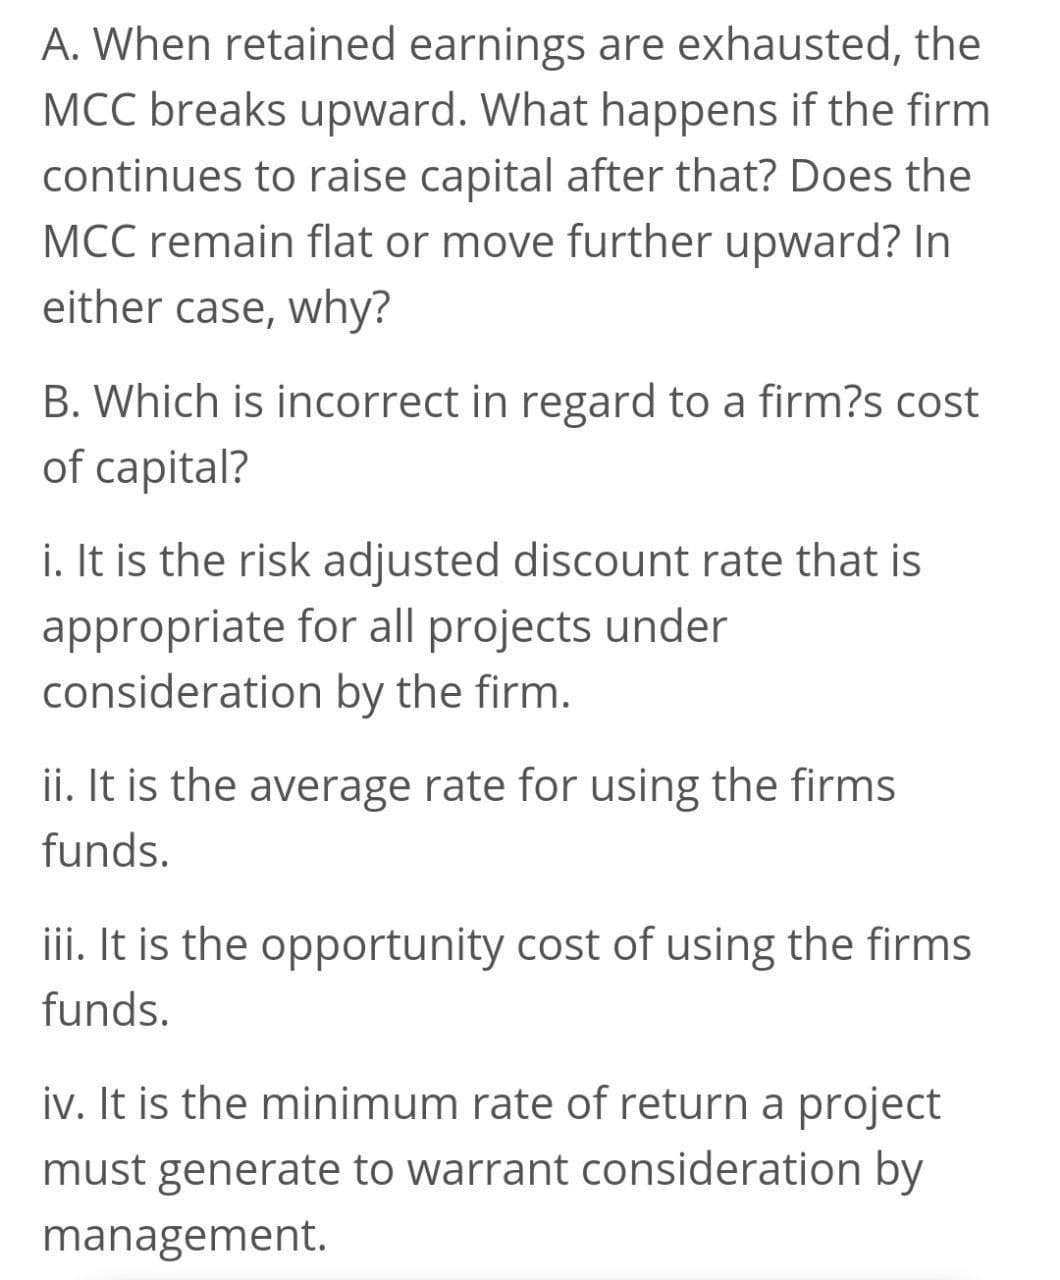 A. When retained earnings are exhausted, the
MCC breaks upward. What happens if the firm
continues to raise capital after that? Does the
MCC remain flat or move further upward? In
either case, why?
B. Which is incorrect in regard to a firm?s cost
of capital?
i. It is the risk adjusted discount rate that is
appropriate for all projects under
consideration by the firm.
ii. It is the average rate for using the firms
funds.
iii. It is the opportunity cost of using the firms
funds.
iv. It is the minimum rate of return a project
must generate to warrant consideration by
management.
